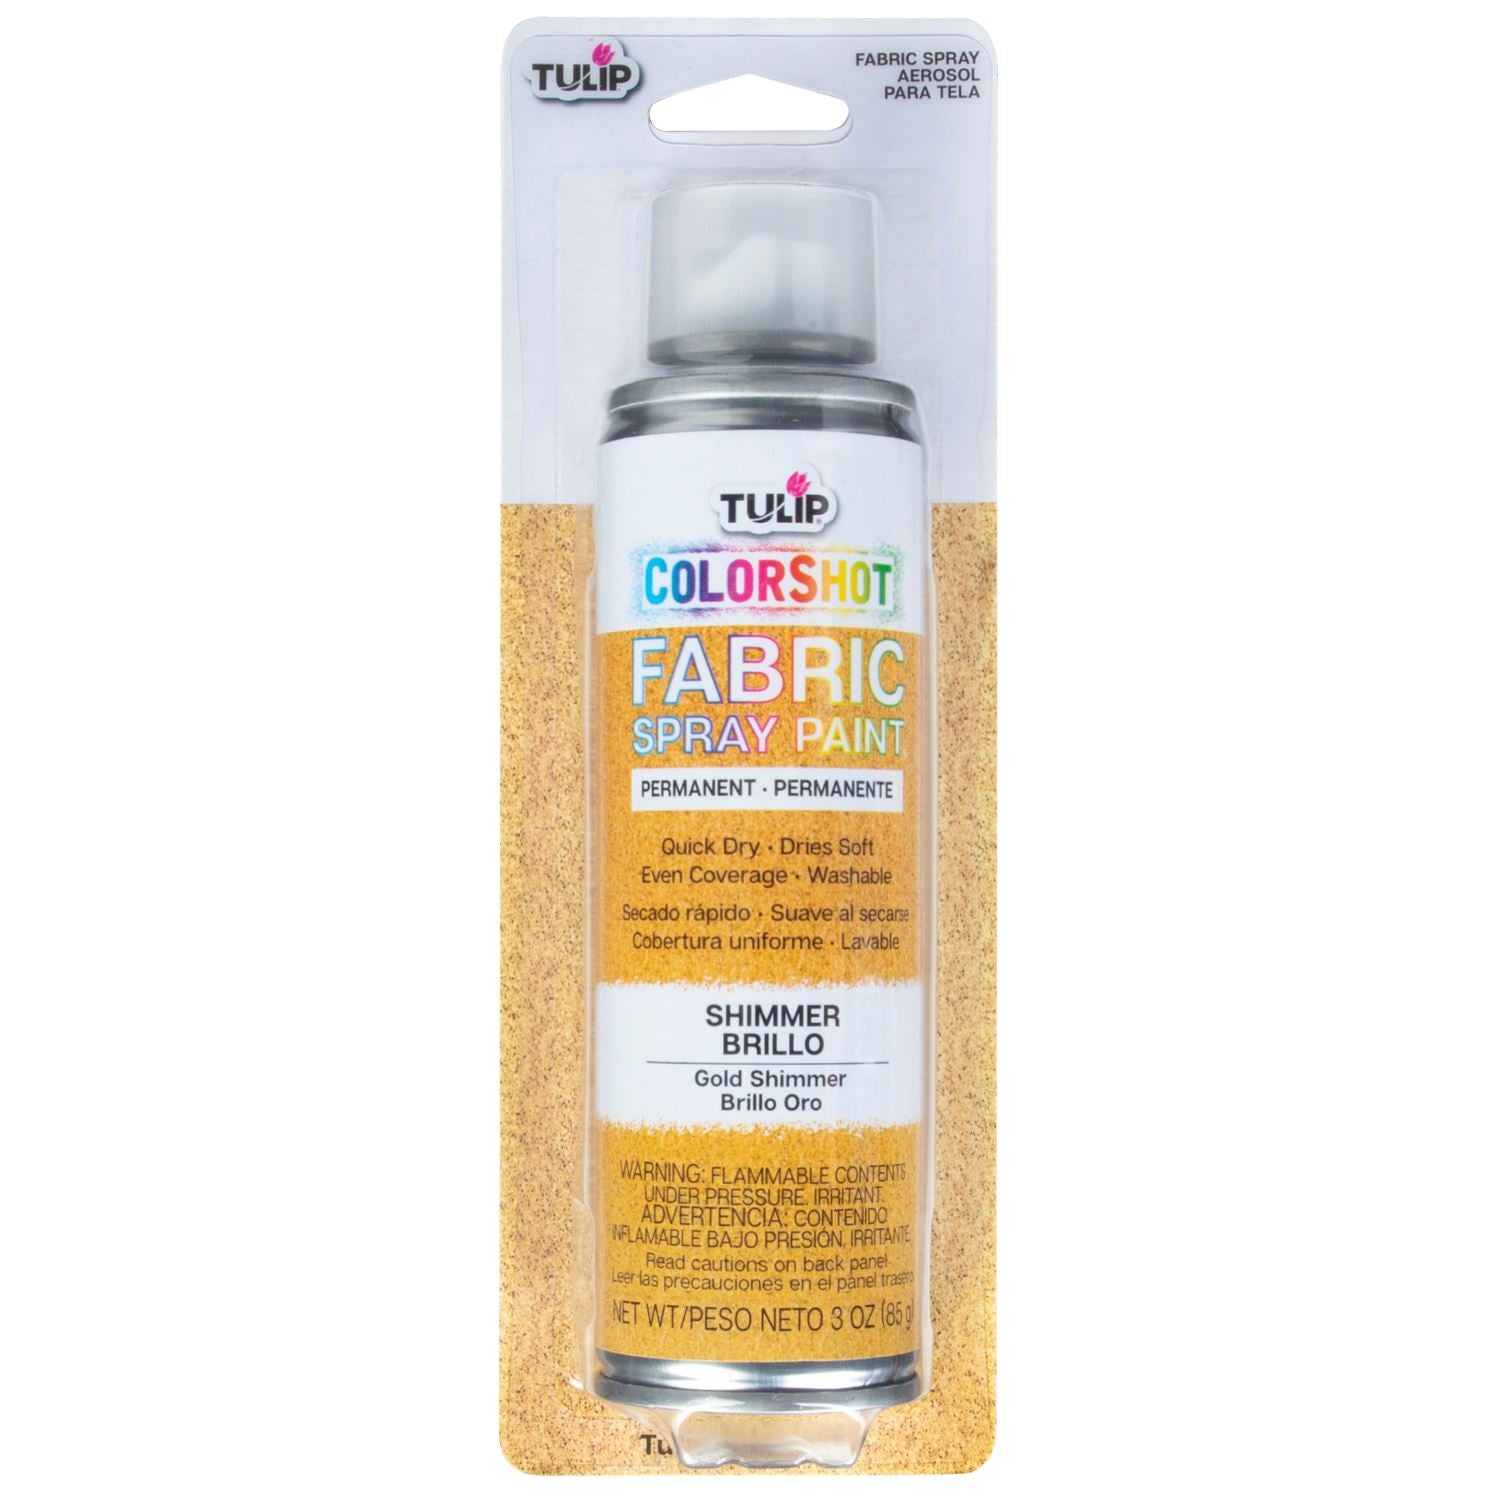 GLITTER SPRAY PAINT - SILVER AND GOLD SPARKLE SHIMMERING PAINT